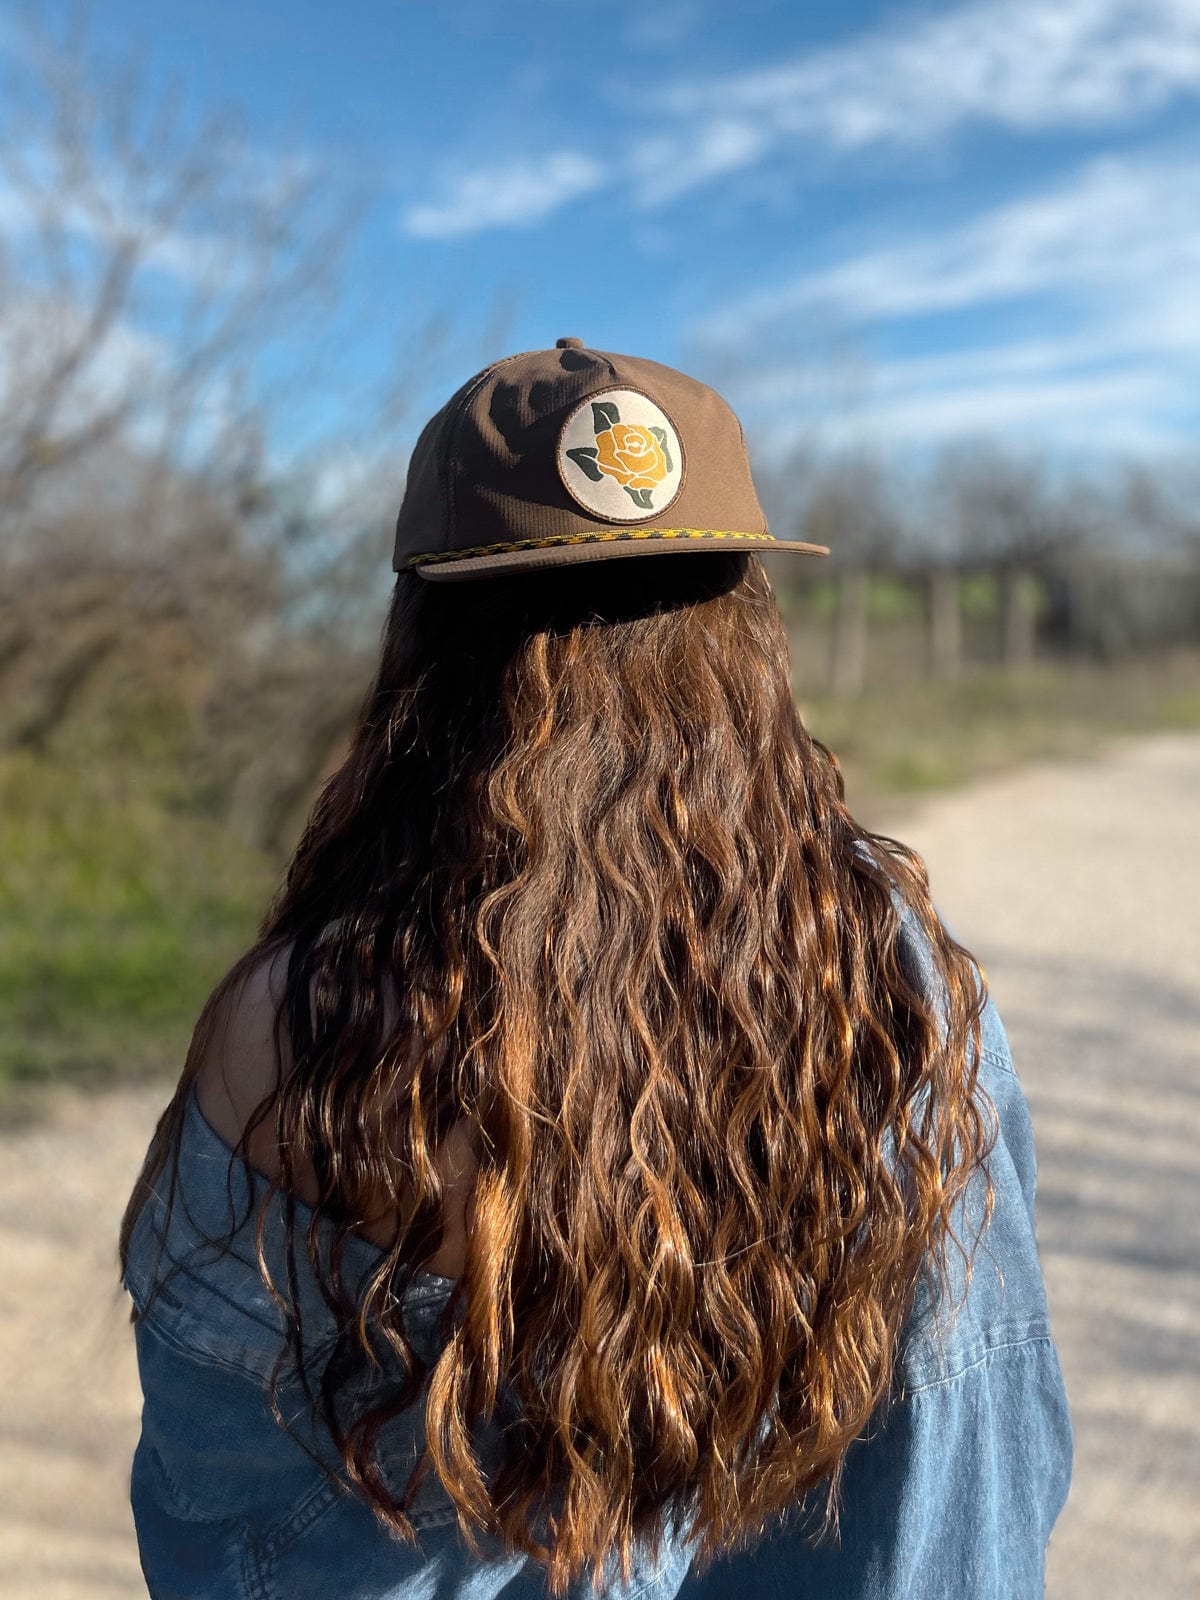 RIVER ROAD CLOTHING Hats Yellow Rose Snapback Rope Hat